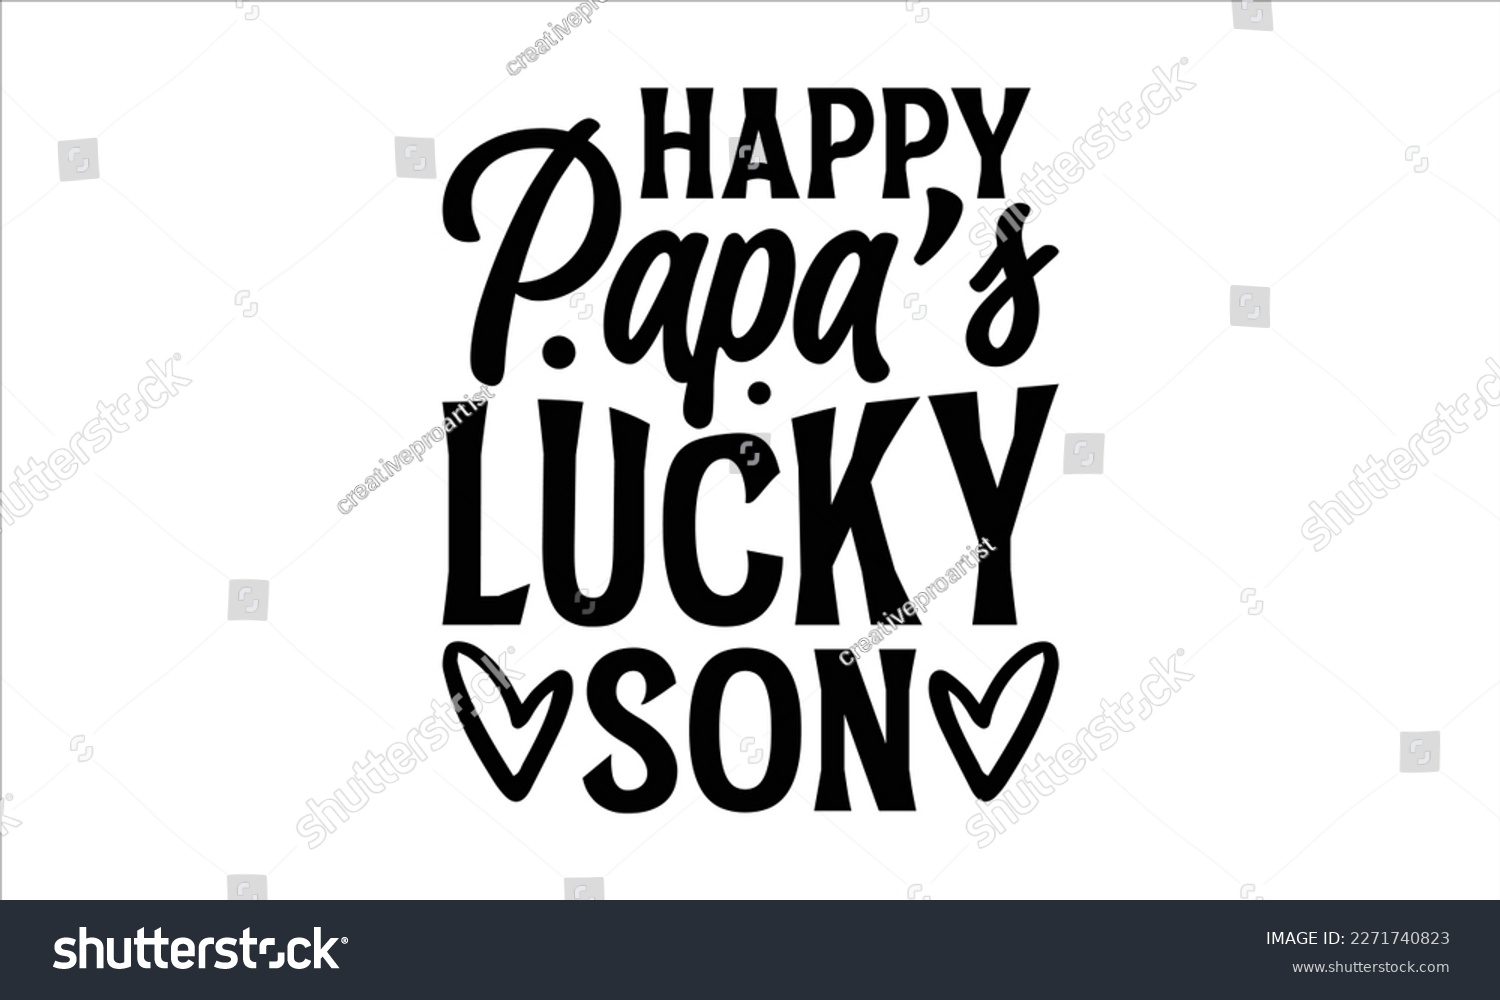 SVG of happy papa’s lucky son- Father's Day svg design, Hand drawn lettering phrase isolated on white background, Illustration for prints on t-shirts and bags, posters, cards eps 10. svg